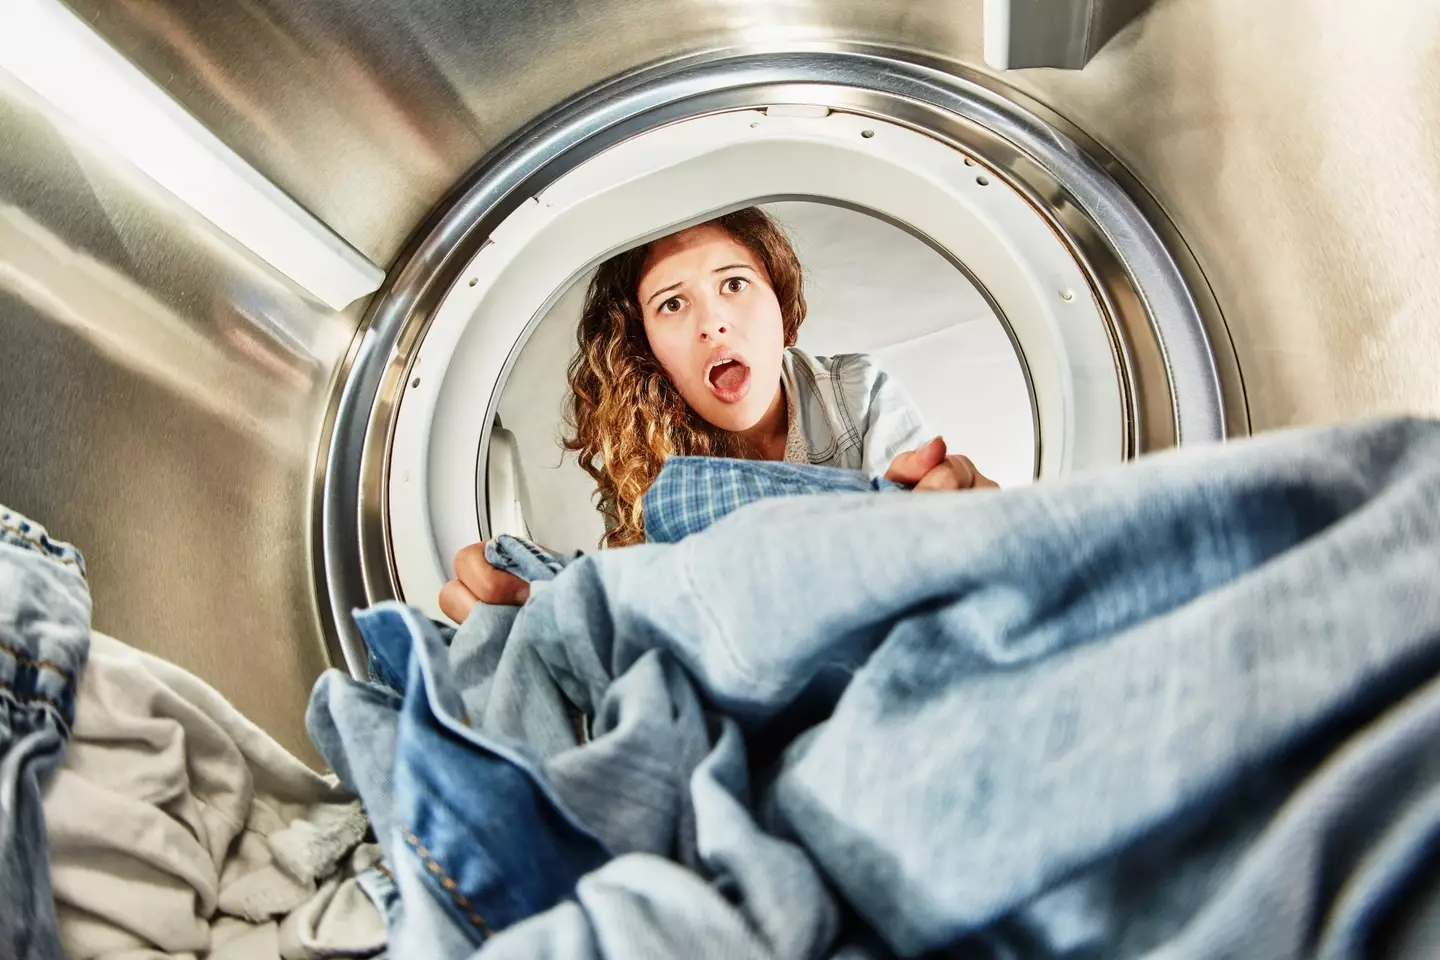 "Jeans in my washing machine? I have failed you, Chip Bergh."